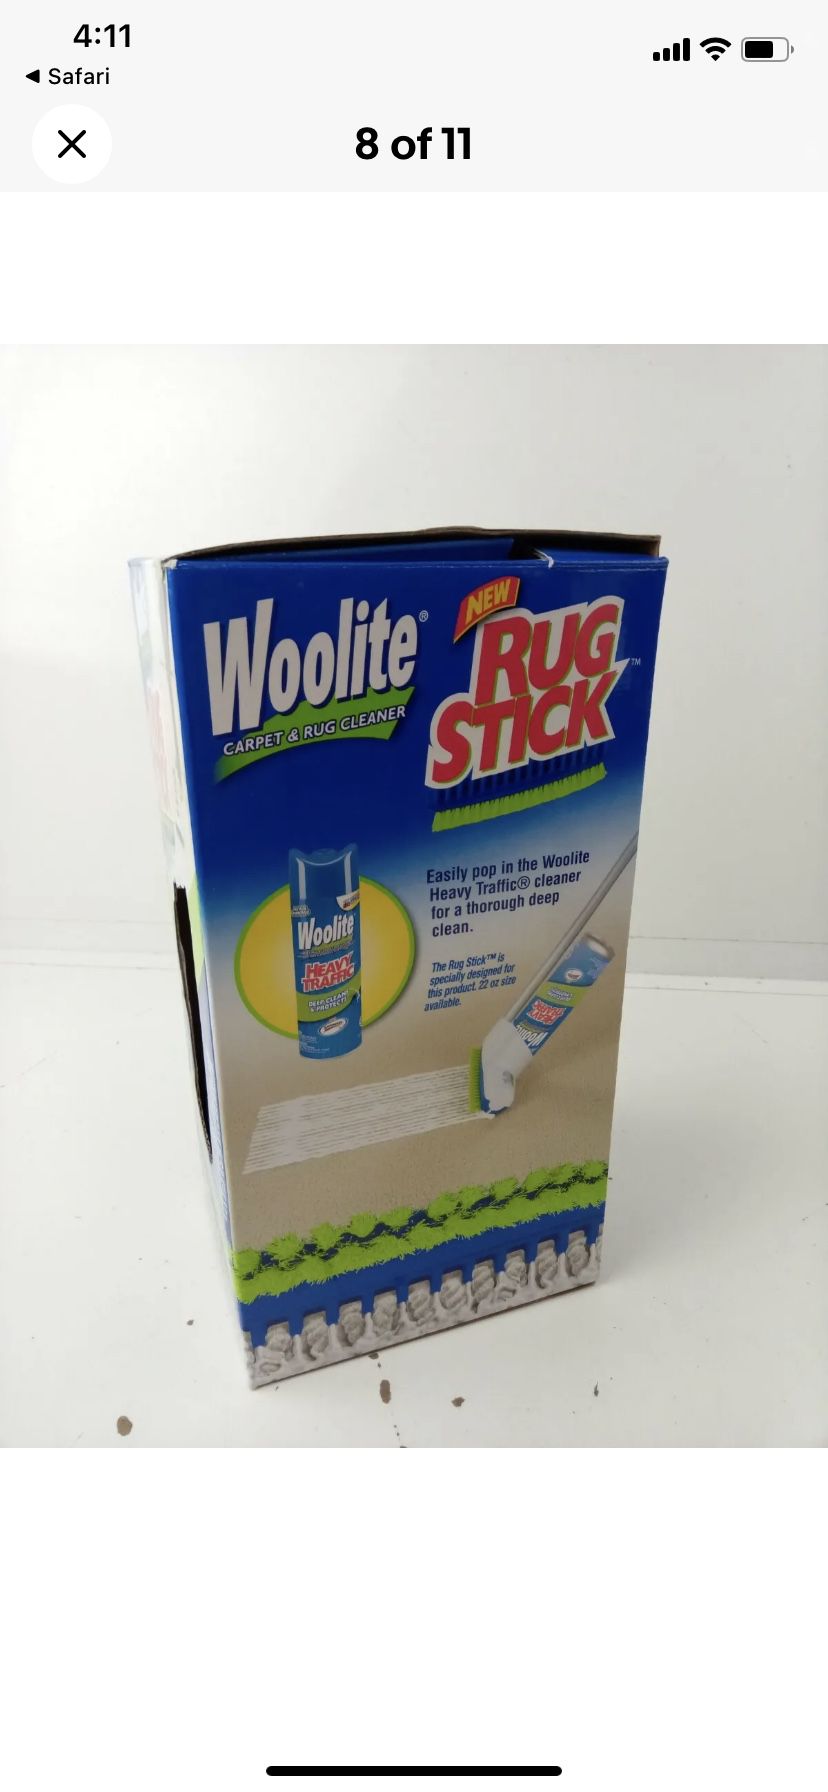 Woolite Carpet And Upholstery Cleaner Stain Remover for Sale in Clermont,  FL - OfferUp